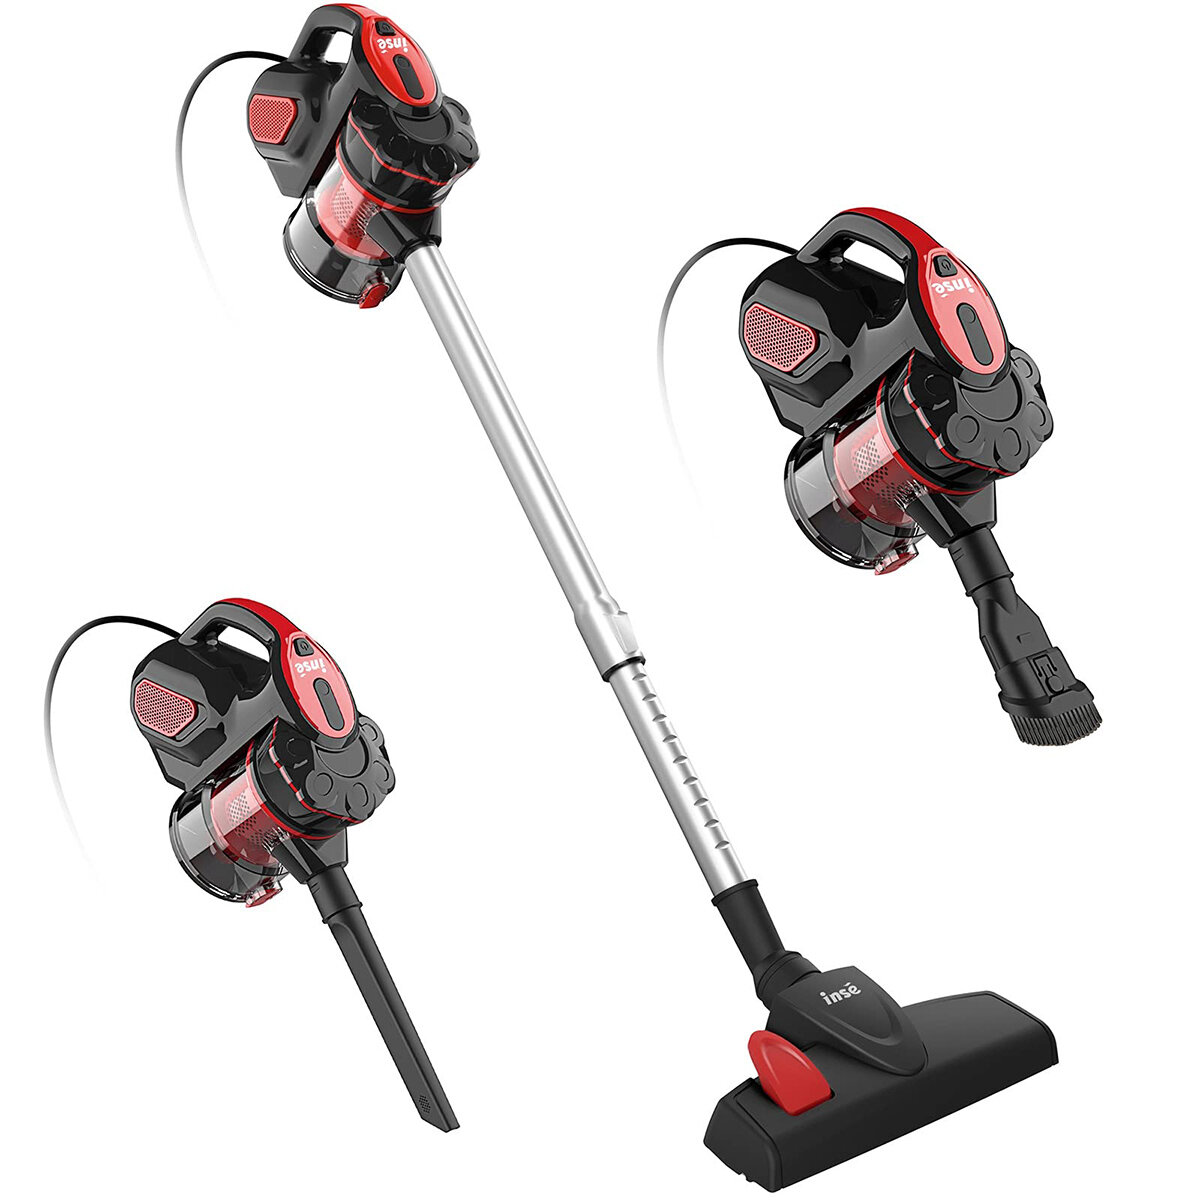 Image of INSE I5 3 in 1 Stick Handheld Vacuum Cleaner 600W 18KPa Powerful Suction 2 Modes Lightweight for Home Hard Floor Carpet